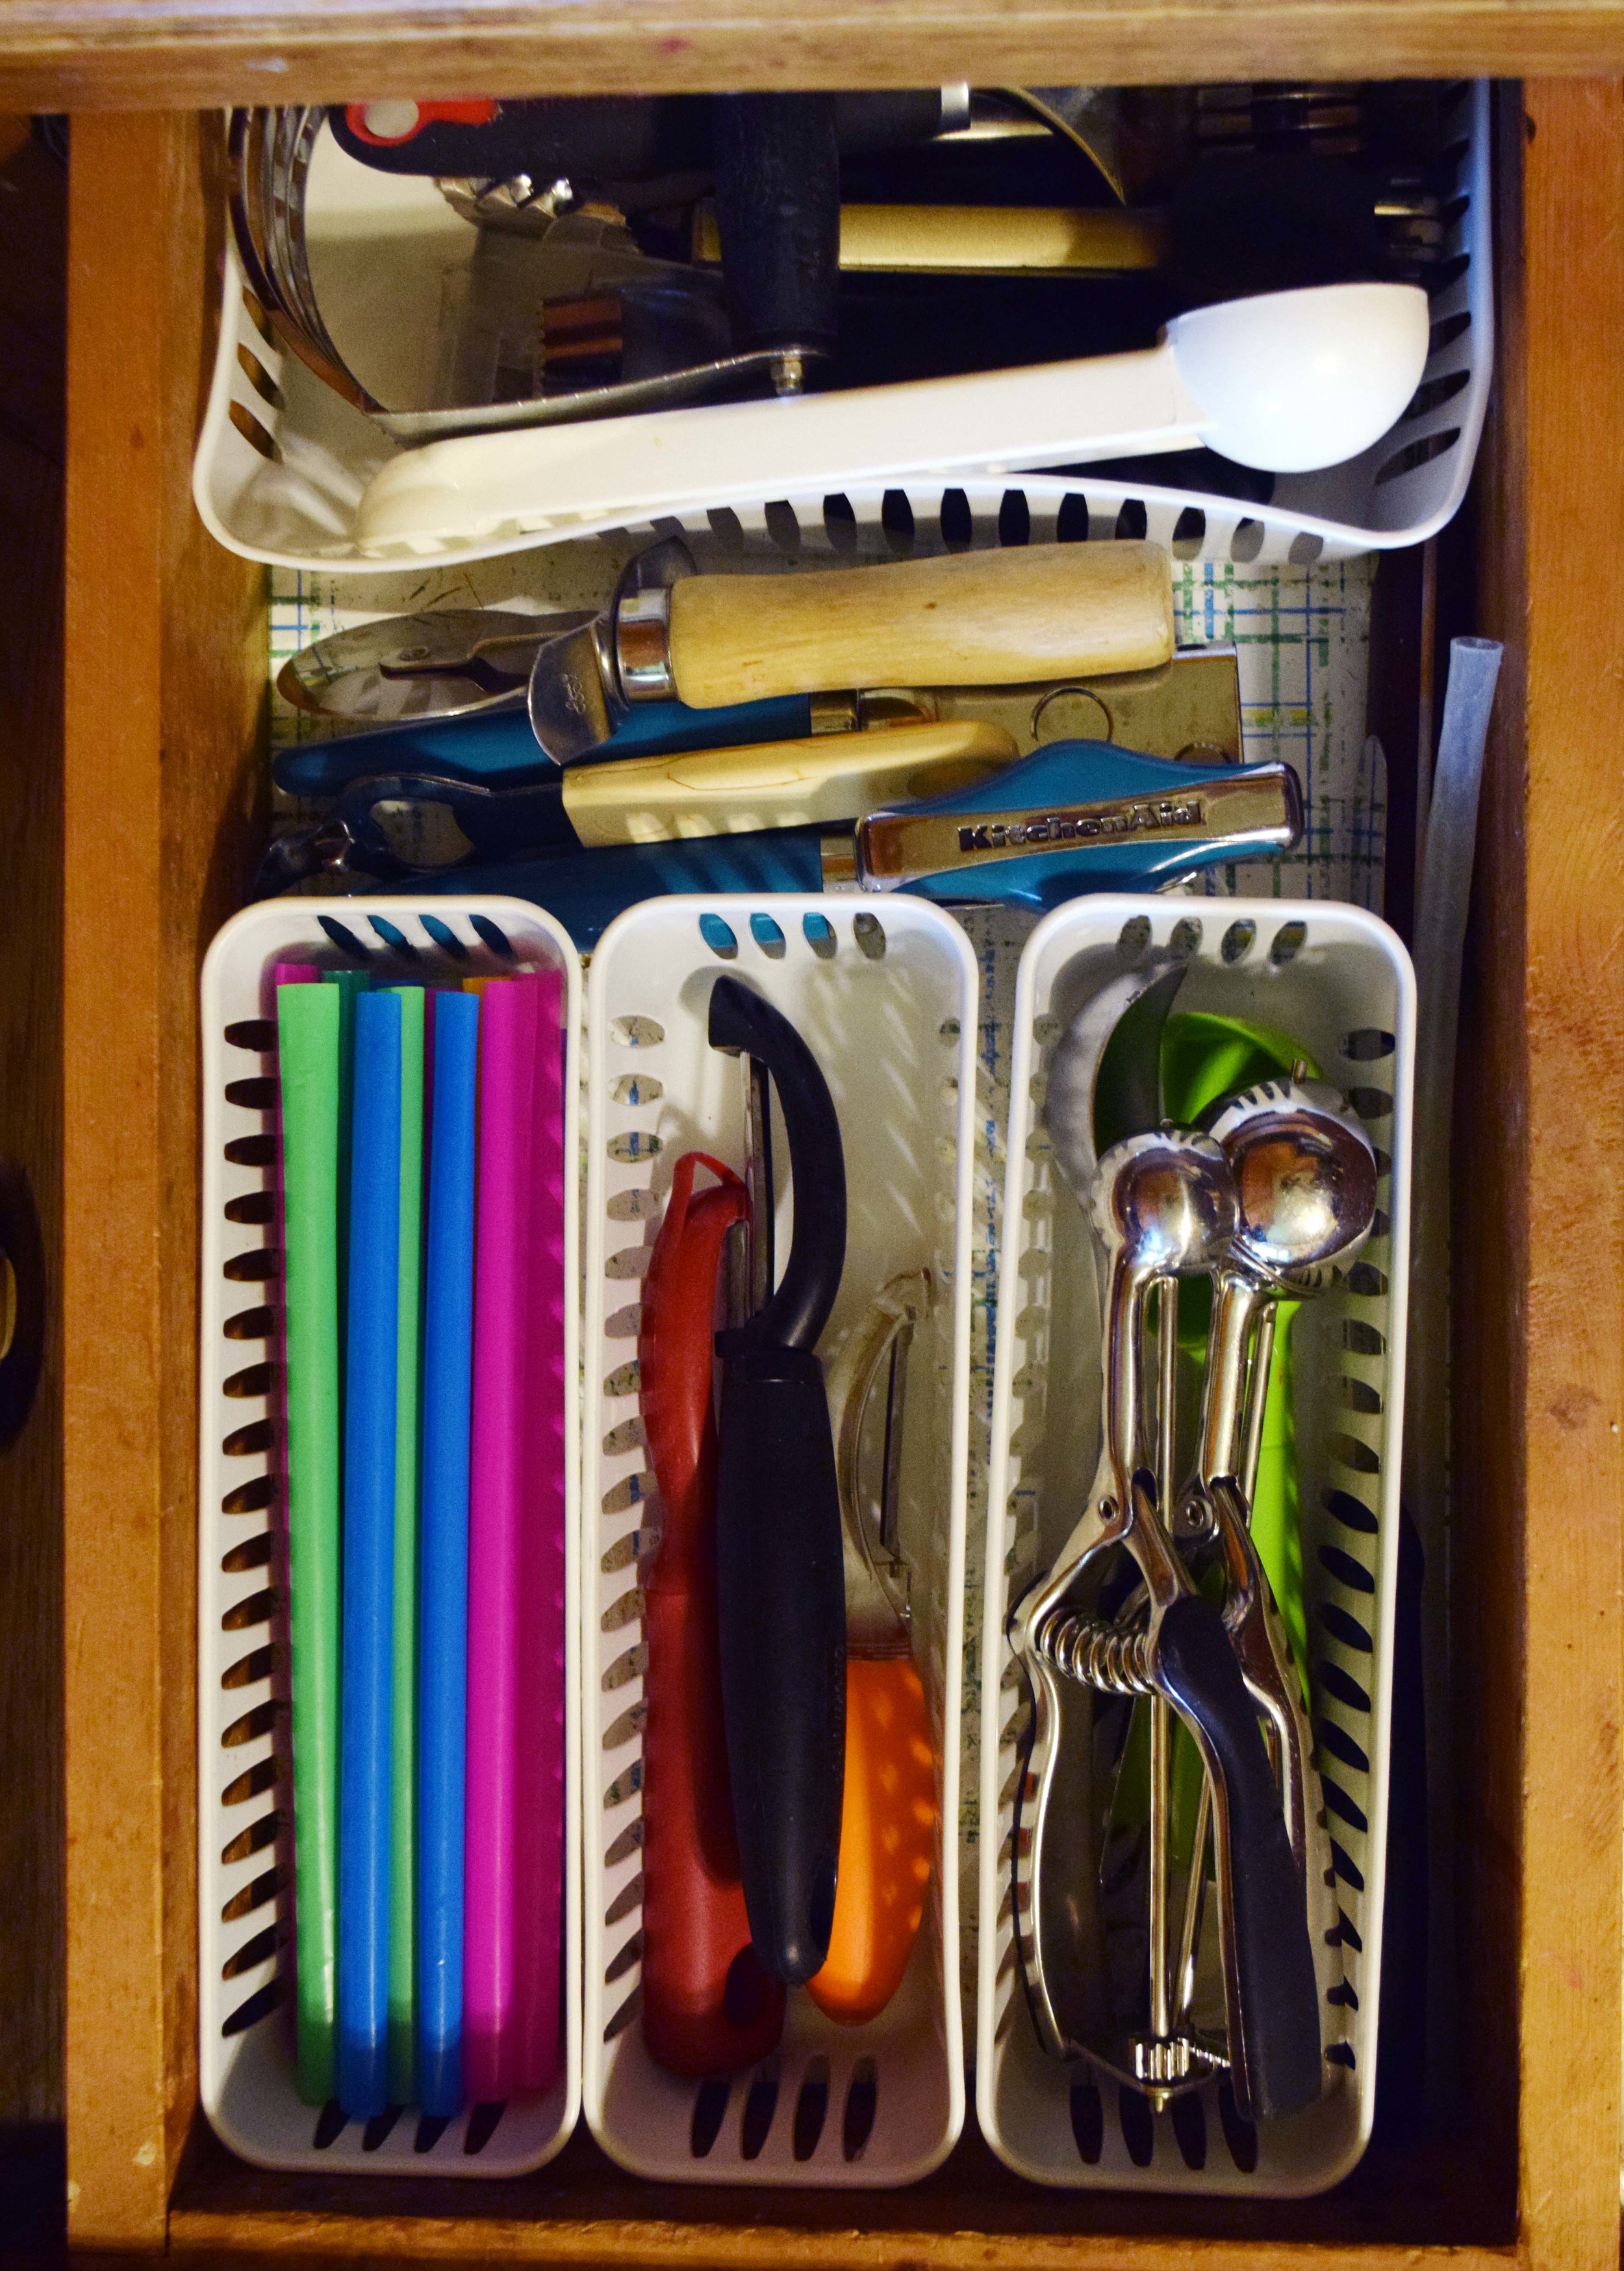 Neatly organize kitchen gadgets with dollar store bins.